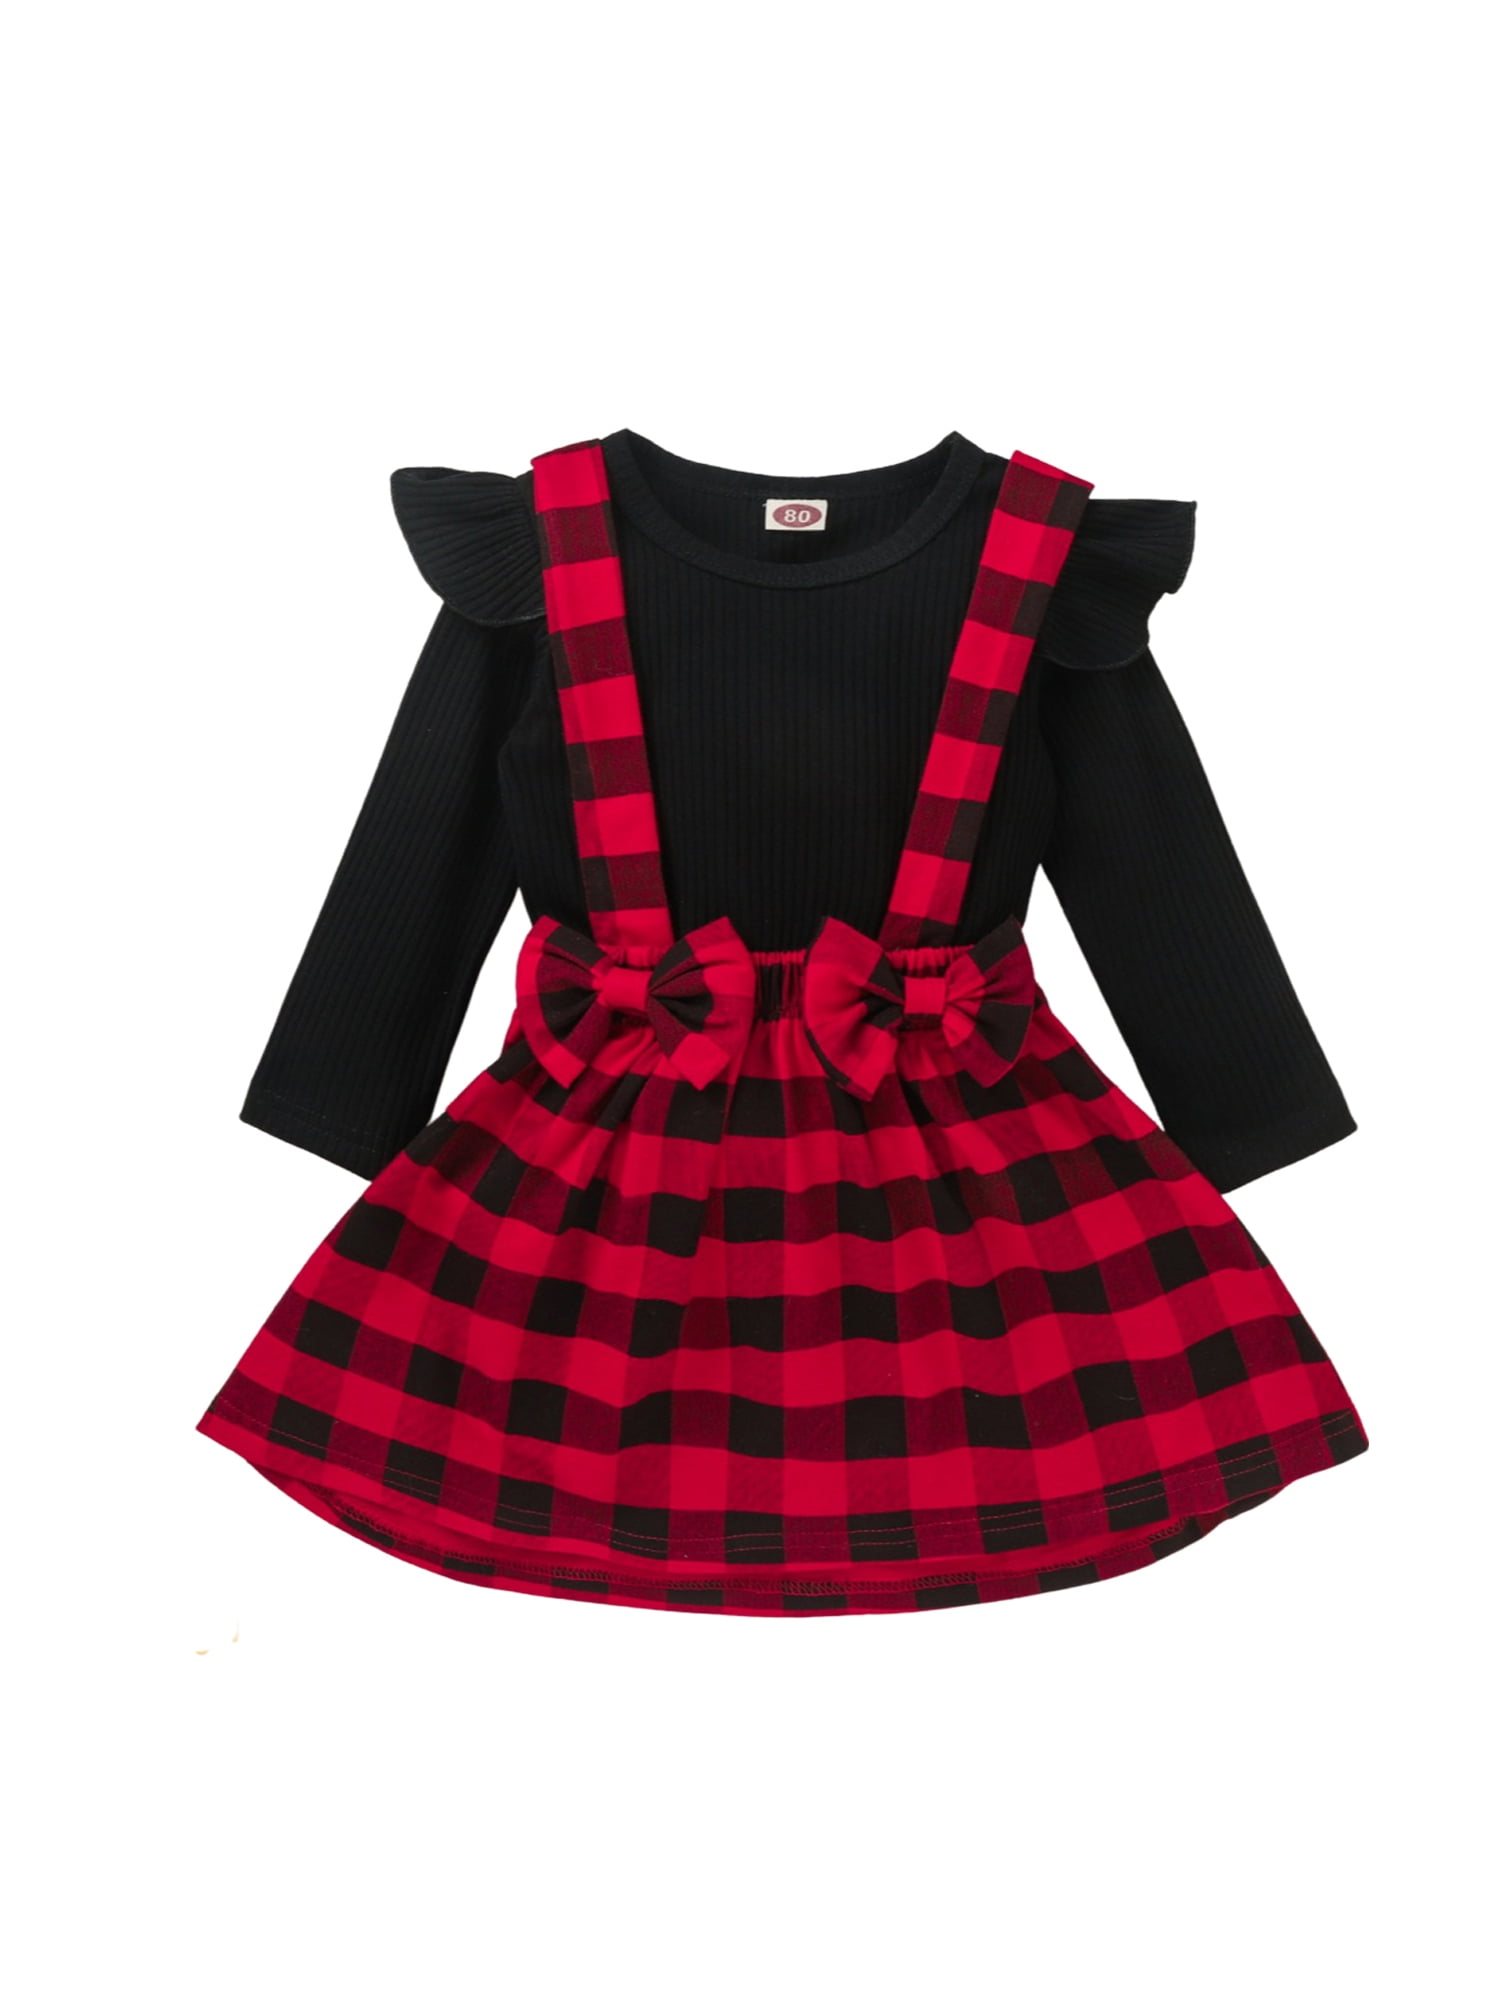 LuckyBB-Baby Girl Cute Outfit Kids Baby Girl Princess Plaid Bow Dress Tops+Tutu Tulle Skirts 2pcs Clothes Set